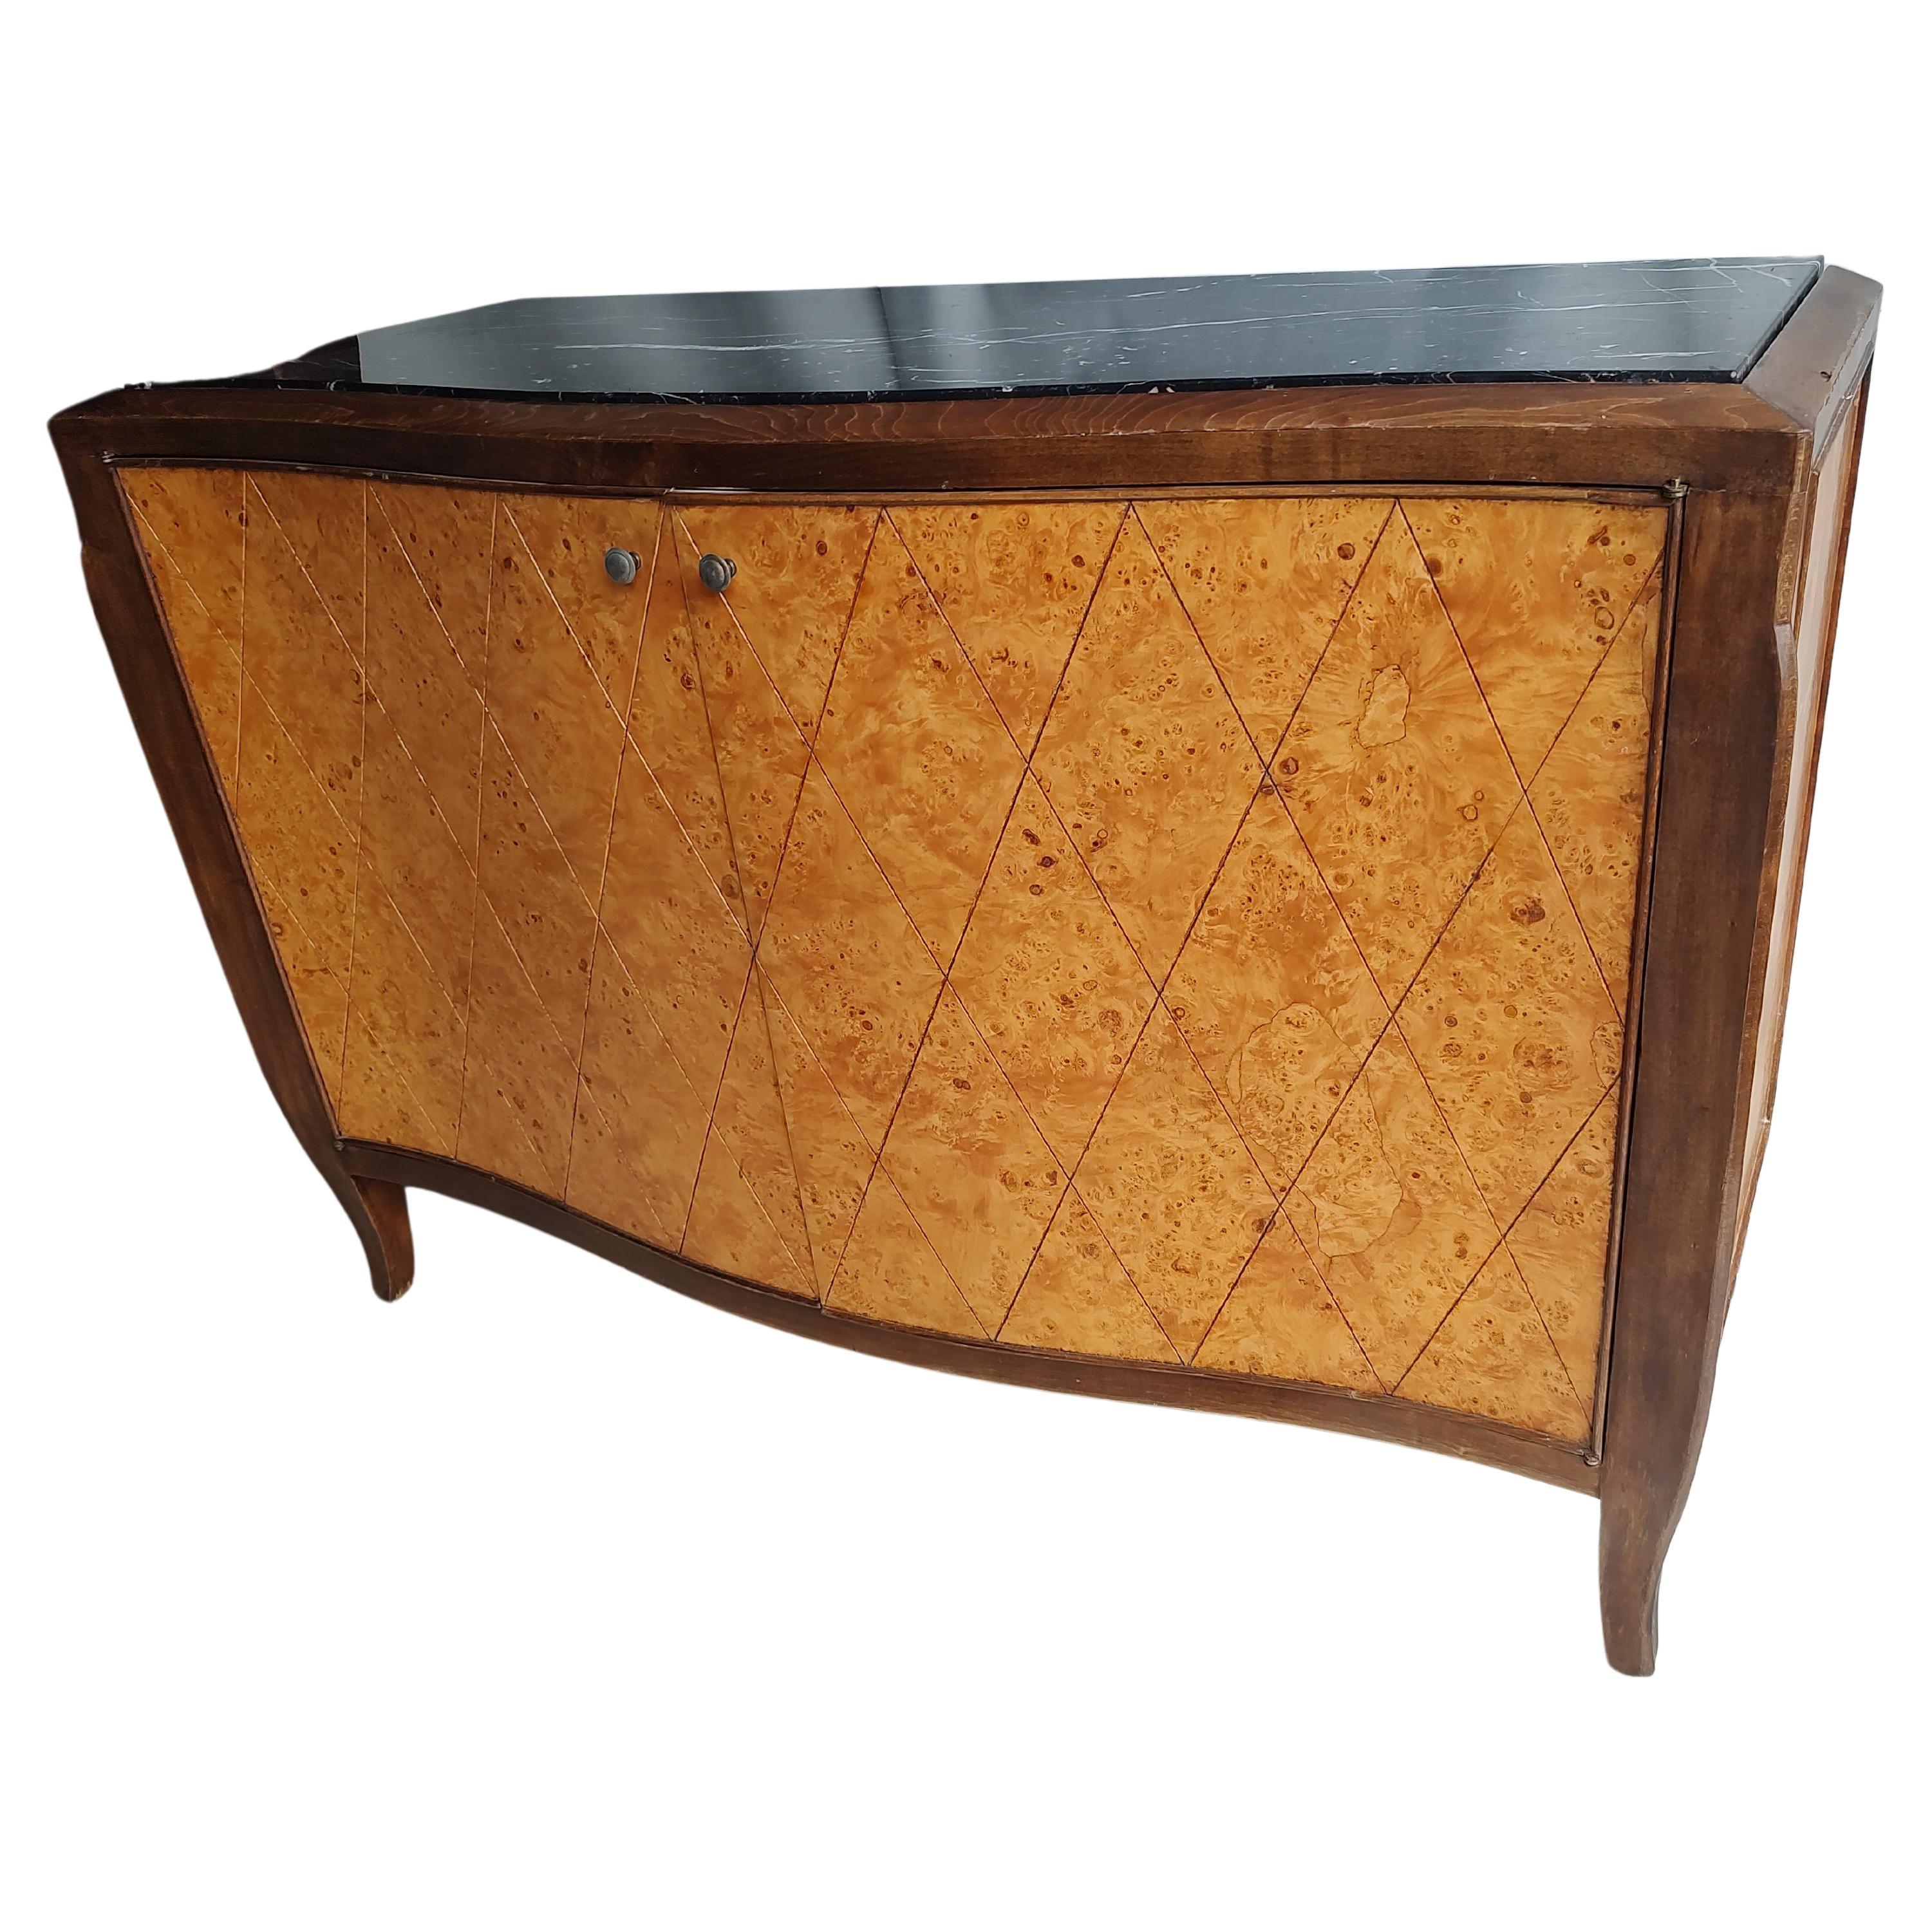 Mid Century Serpentine Burled Olive Wood Marble Top Bloomingdale's Made in Italy Bon état - En vente à Port Jervis, NY